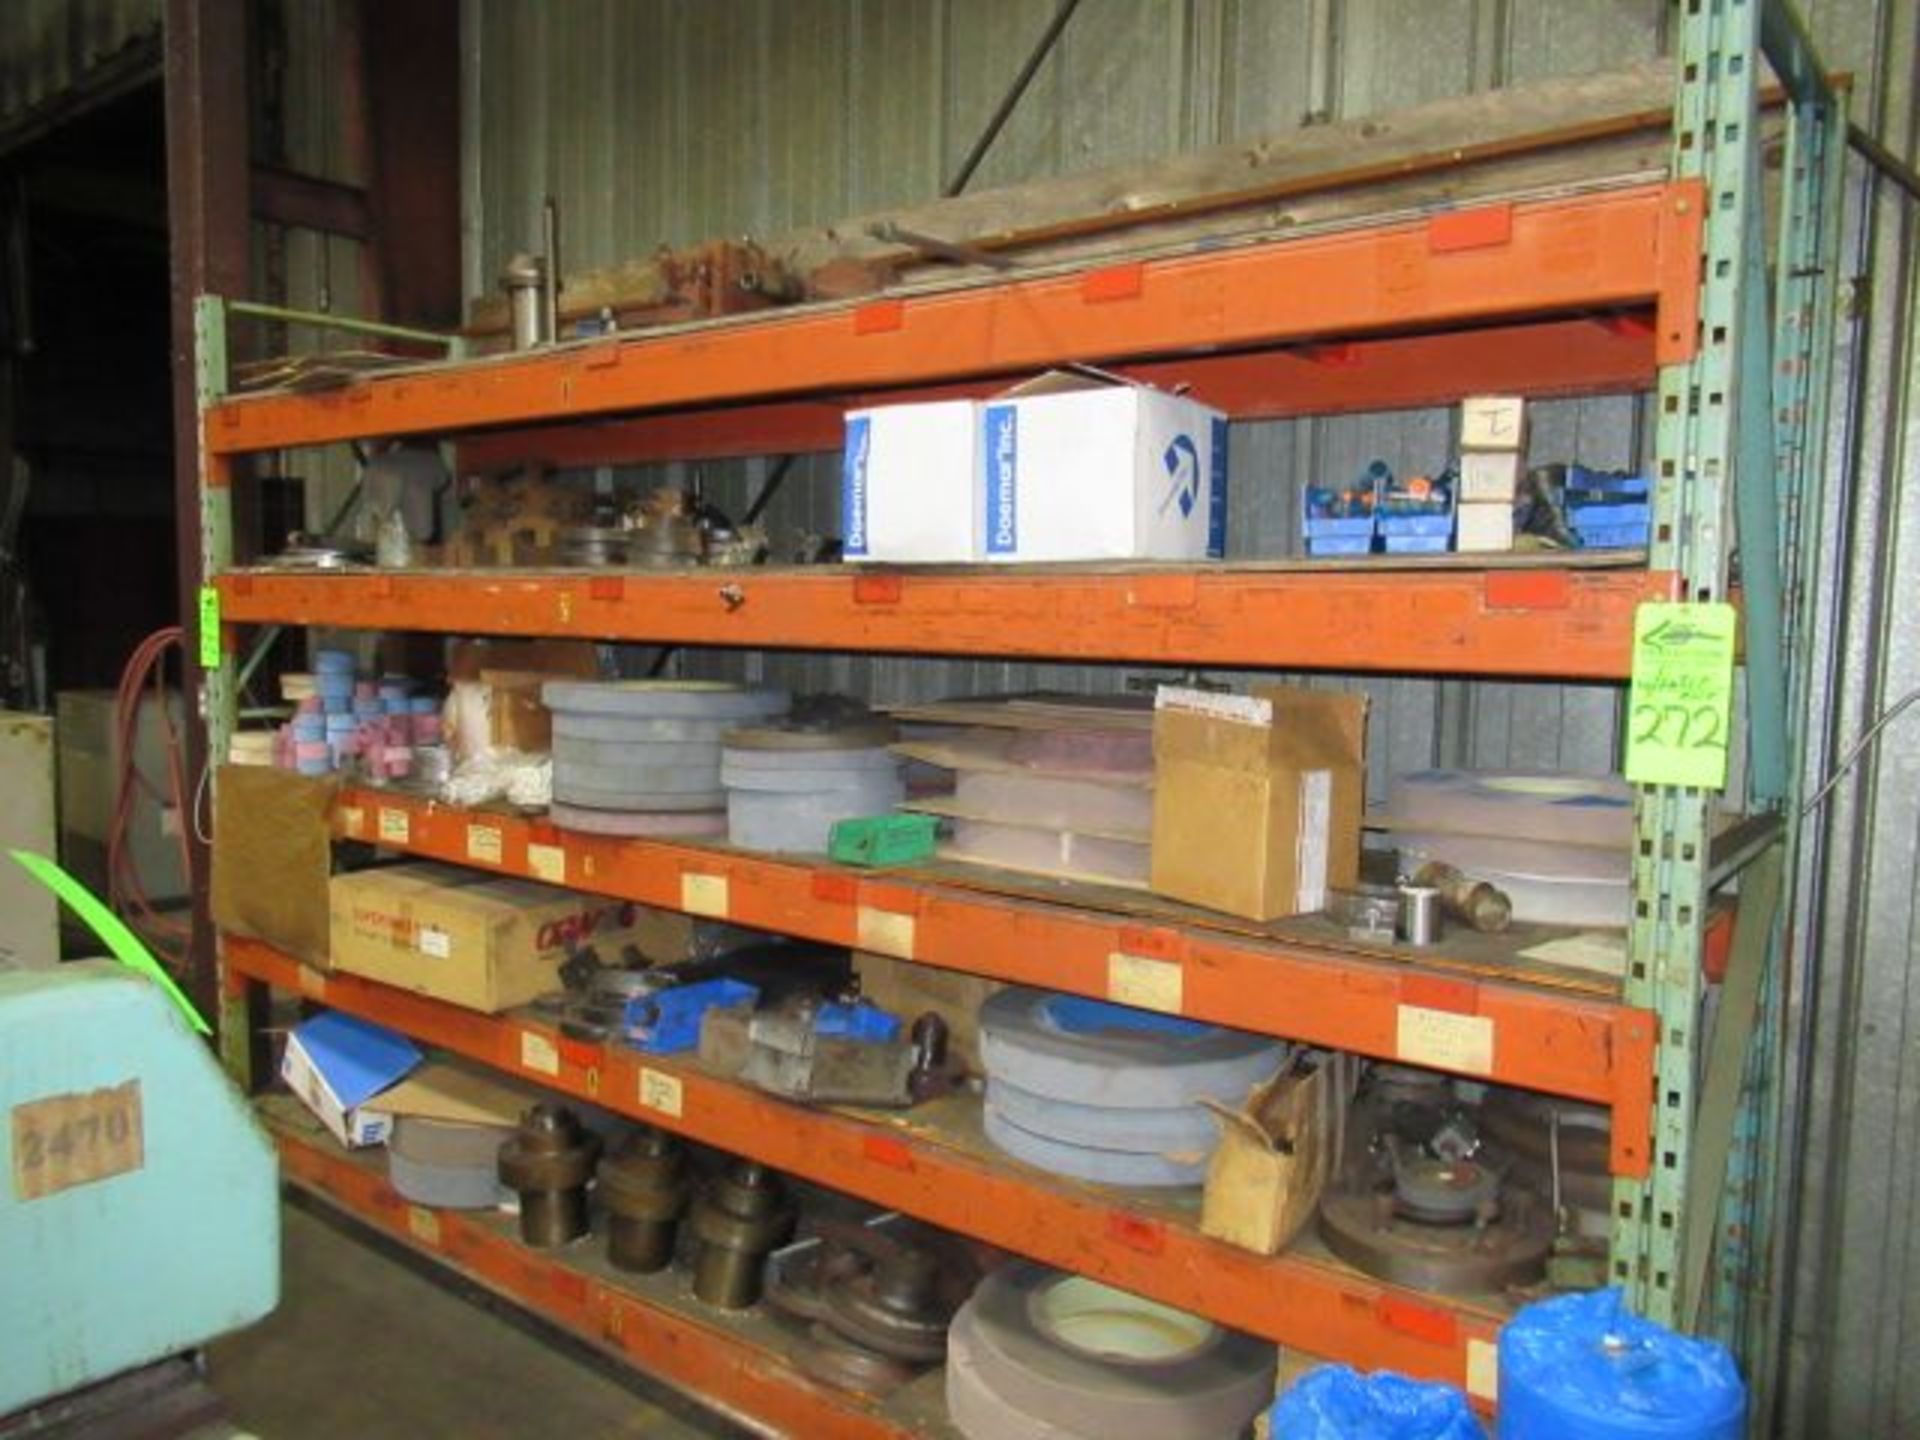 Lot. Grinding Wheels & Grinding Wheel Attachments Assorted Sizes & Types w/ Pallet Racks - Image 2 of 4